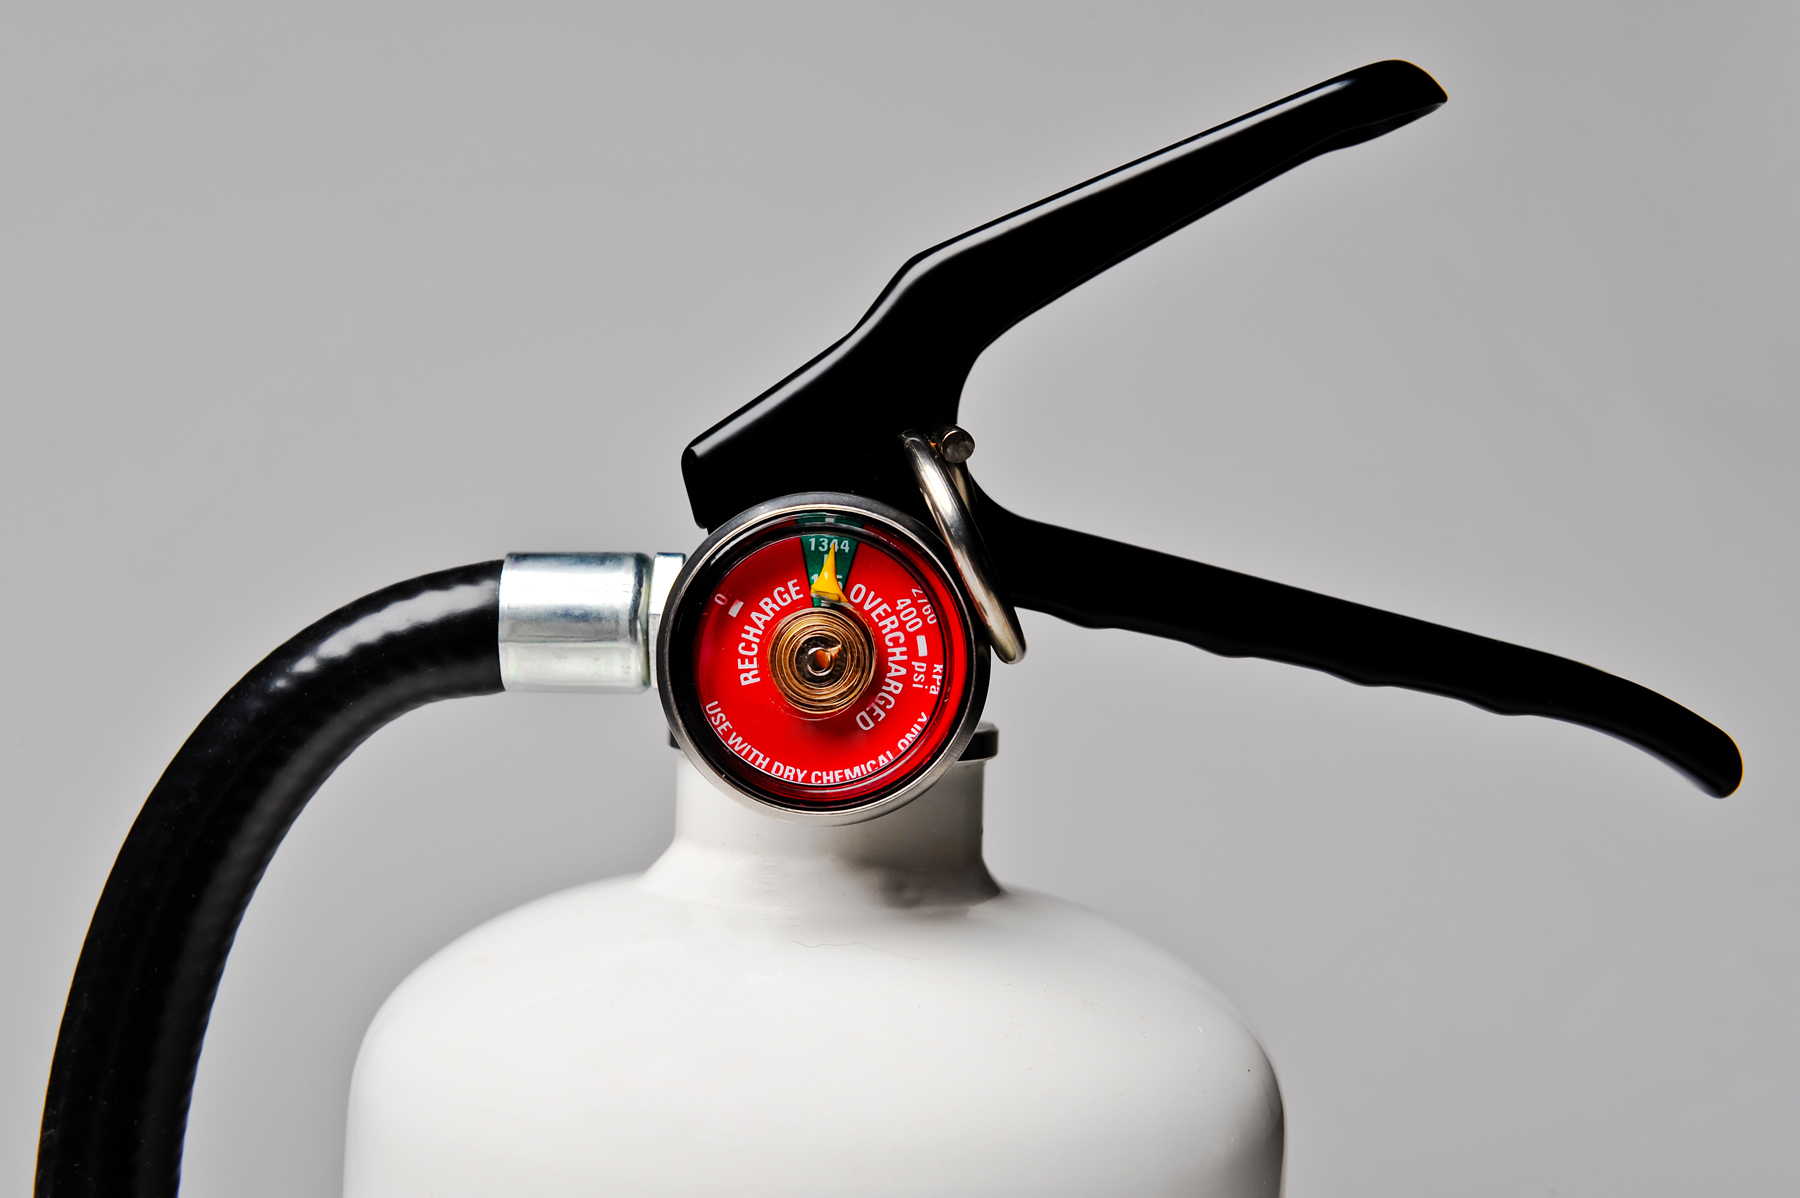 Fire Extinguisher Service, Maintenance, Recharge and Inspections in Westlake Village, California